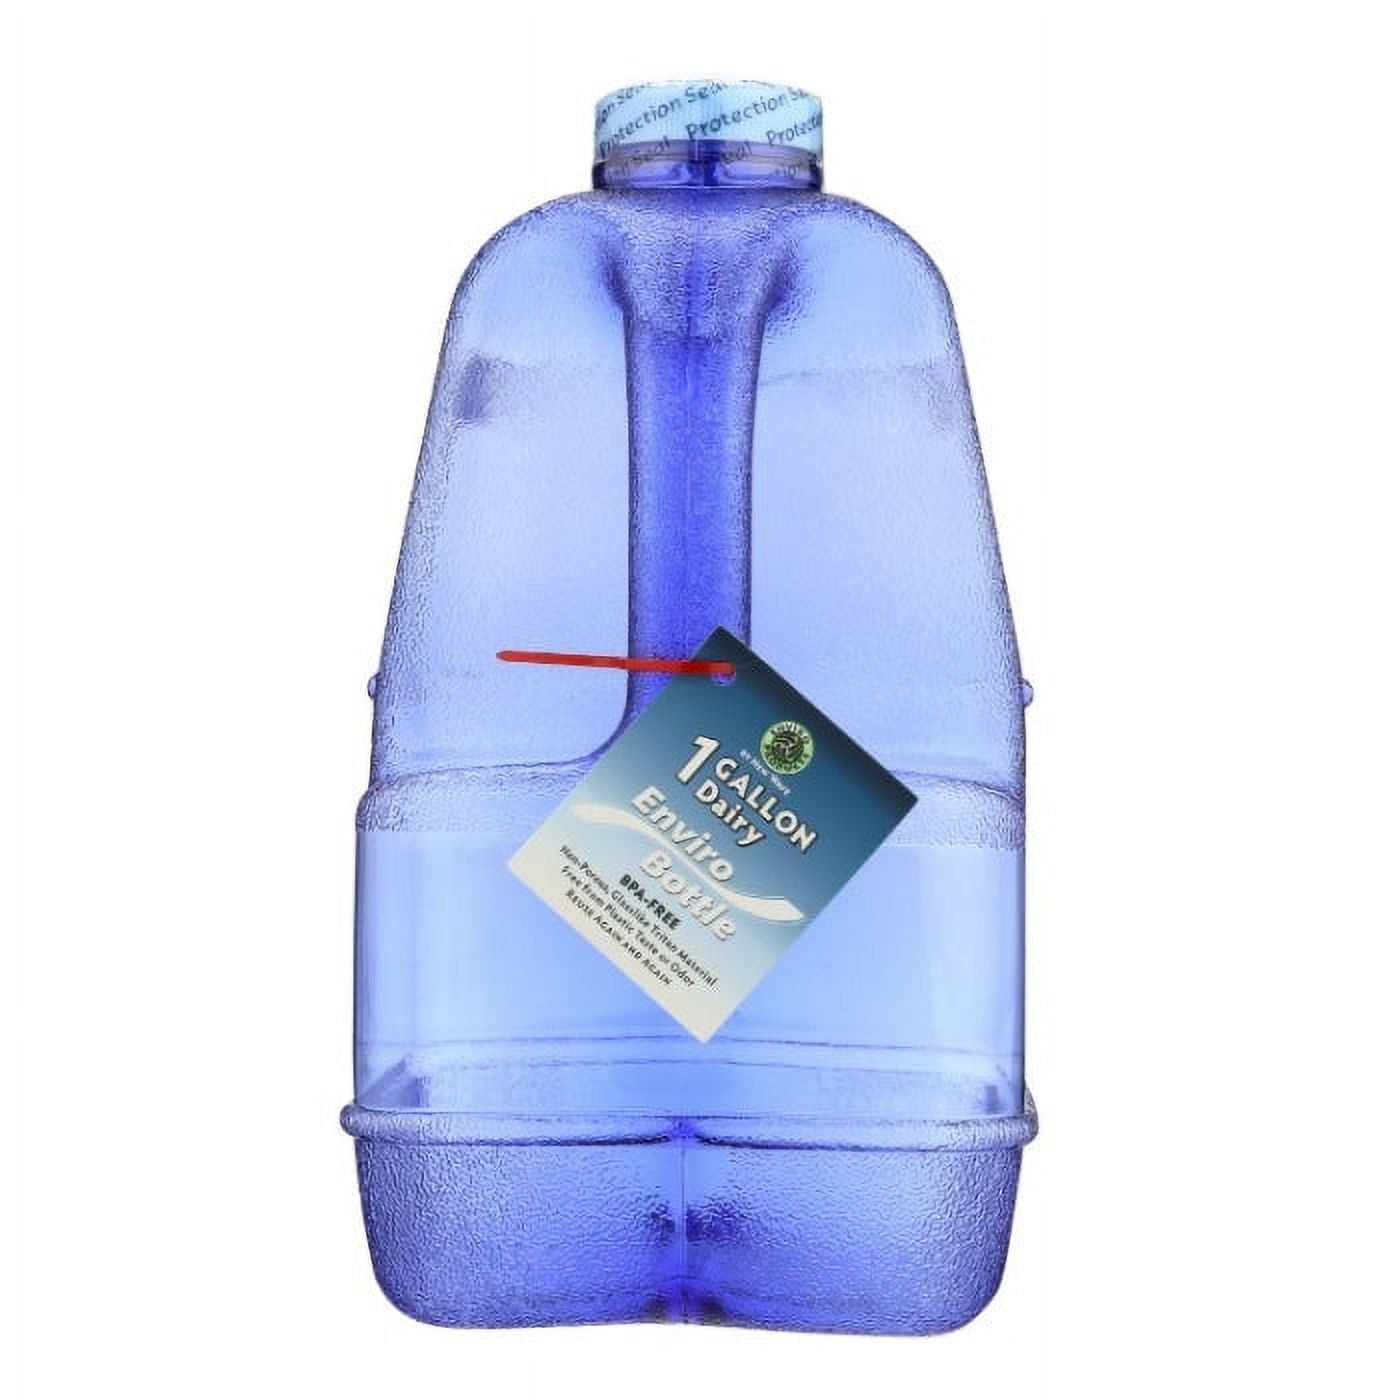 Lingouzi 2.2L Half Gallon Water Bottle with Handle & Covered Straw Lid,  Leakproof Reusable Large Capacity Sport Water Jug with Time Marker for  Outdoor Sports, Gym Workout, Camping, BPA Free 